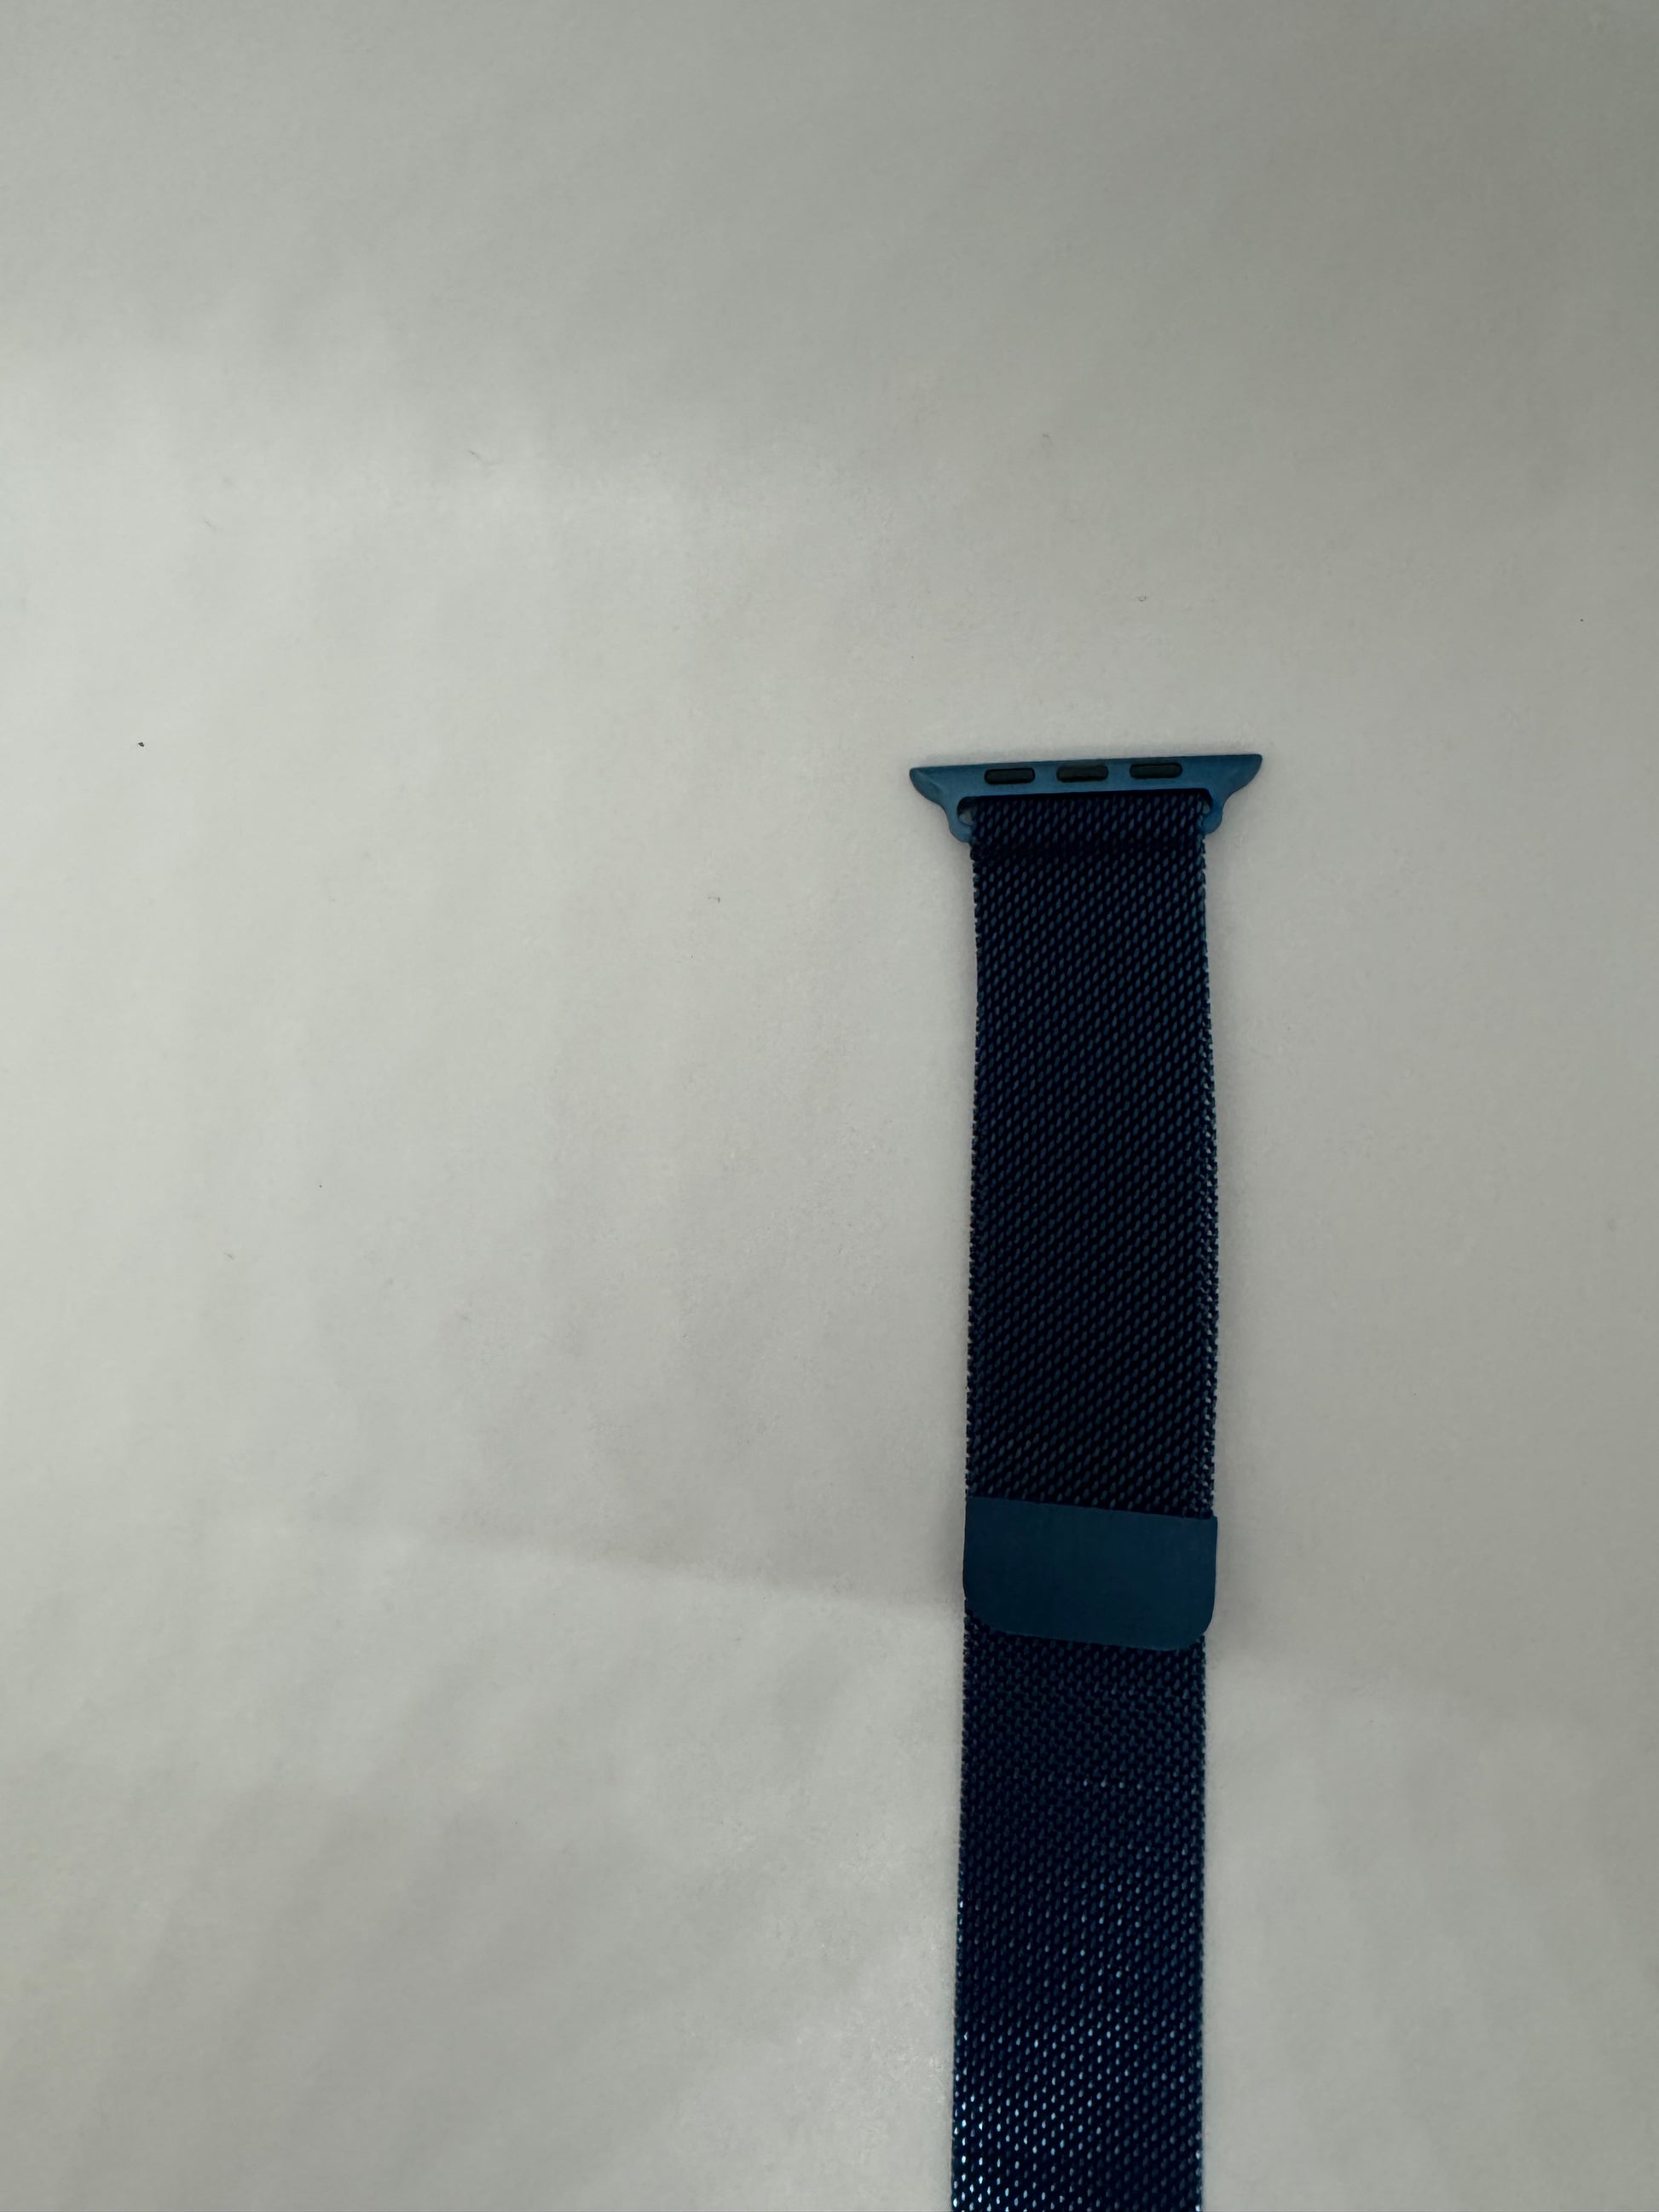 The picture shows a blue watch strap against a white background. The strap is made of a mesh material and has a loop to secure the excess strap. The top part of the strap has a connector with three holes, which is likely used to attach it to a watch. The strap is dark blue in color with a slightly lighter blue loop and connector.